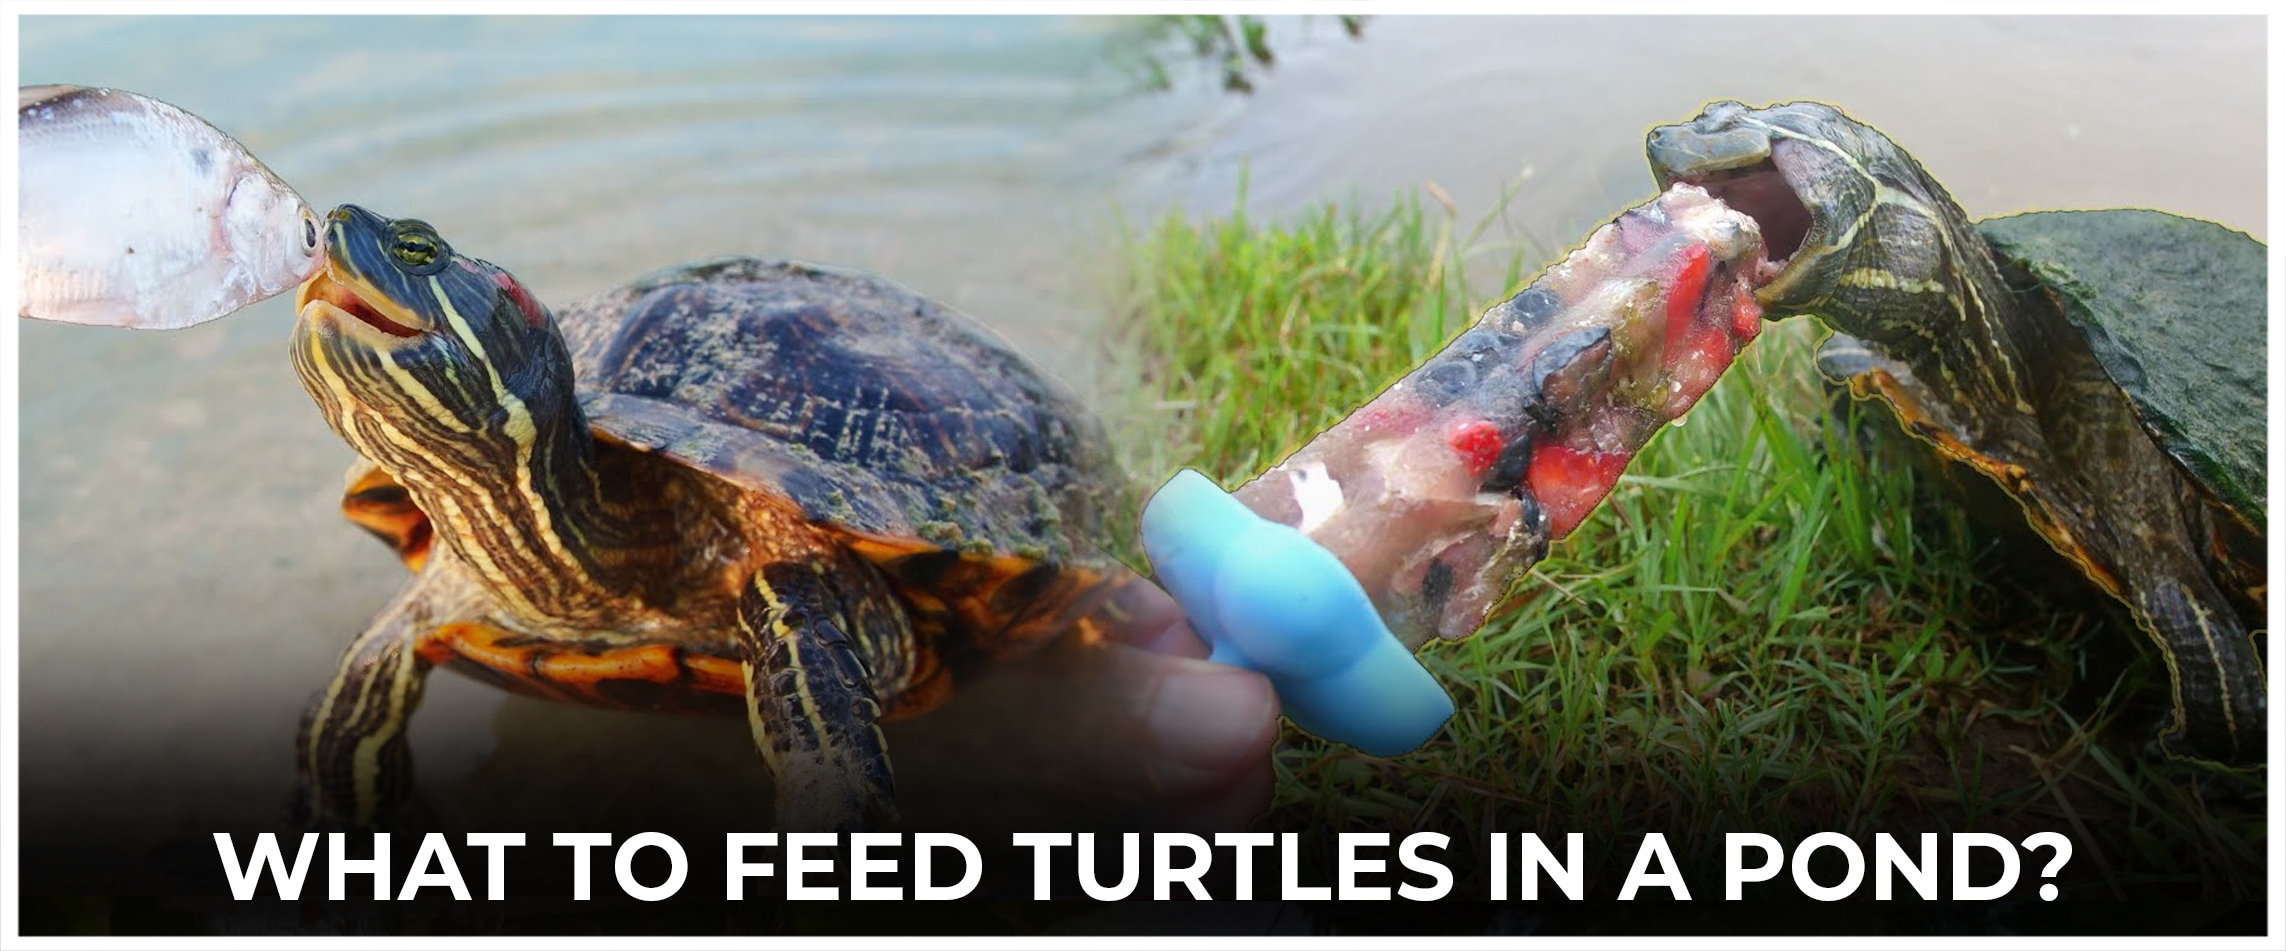  What To Feed Turtles In A Pond